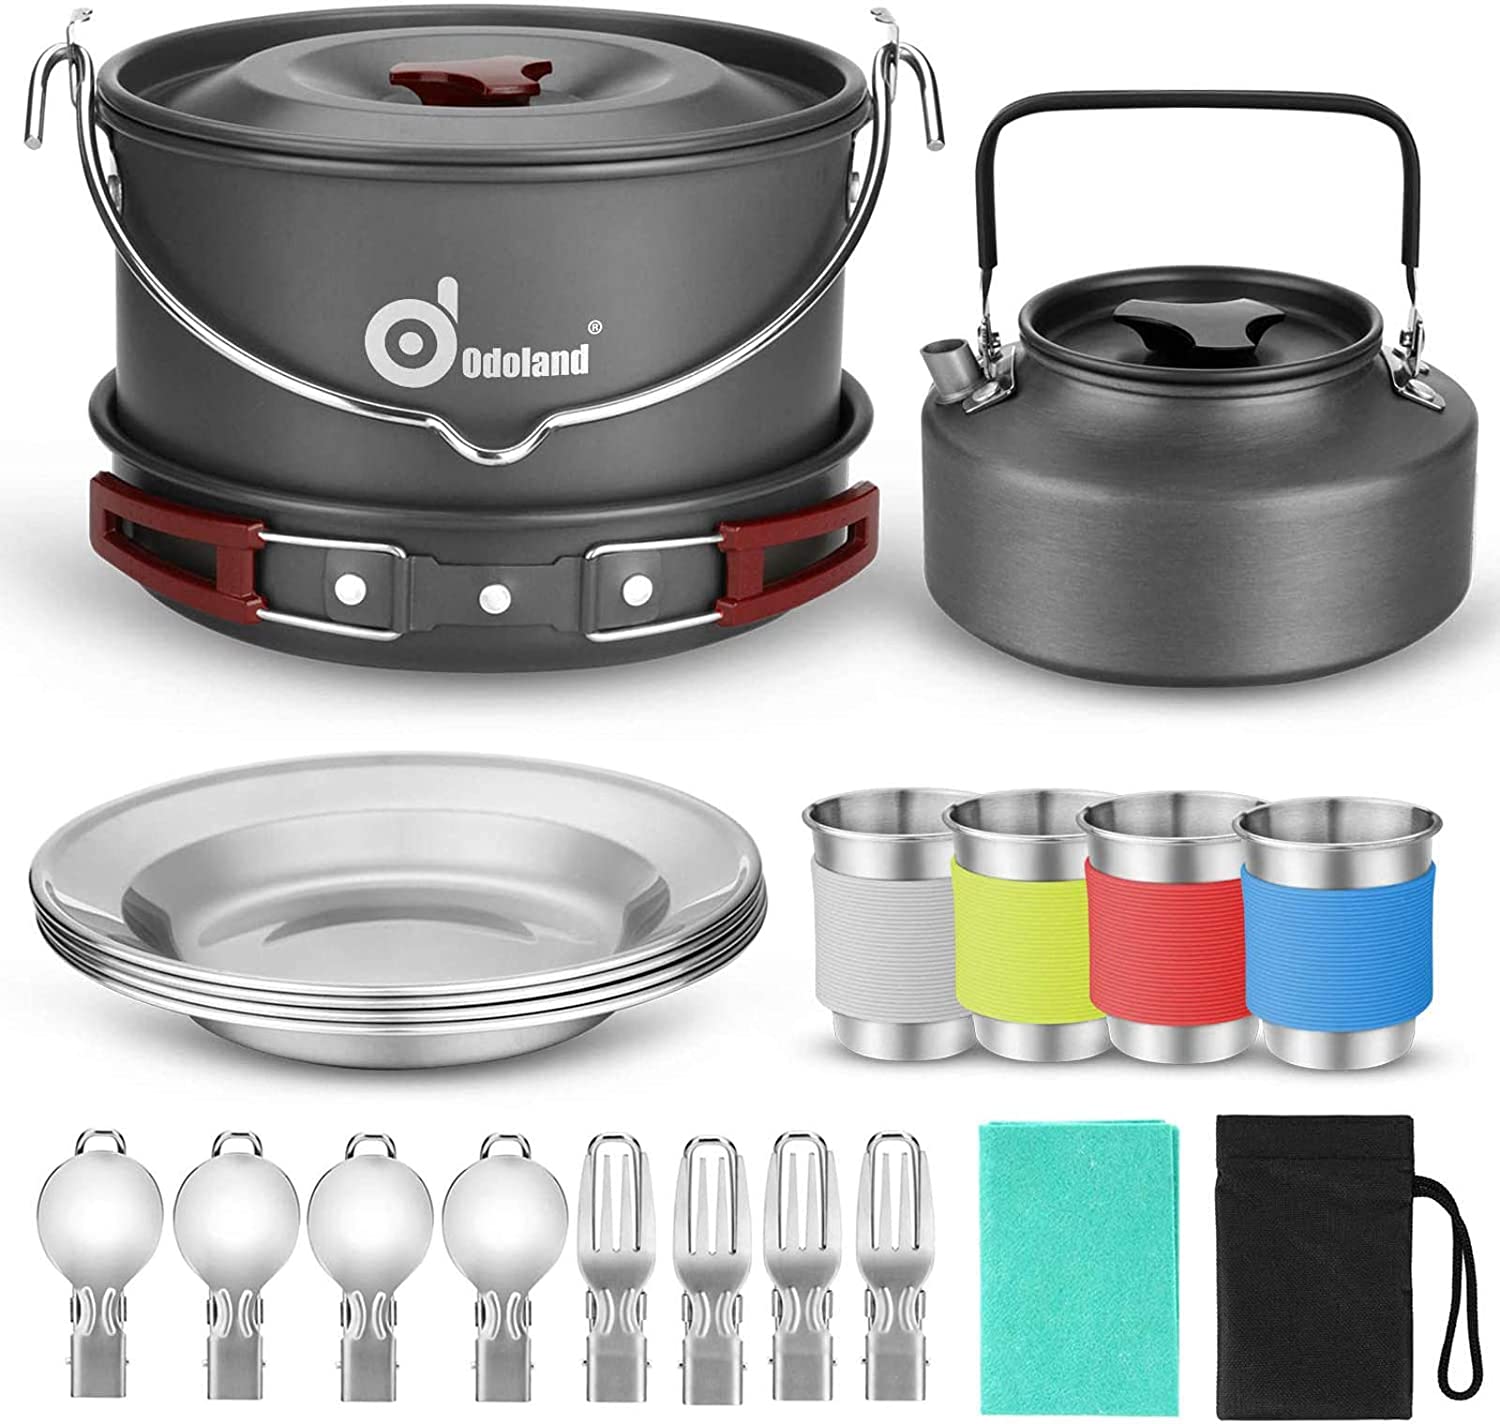 8. Odoland Camping Cookware Mess Kit